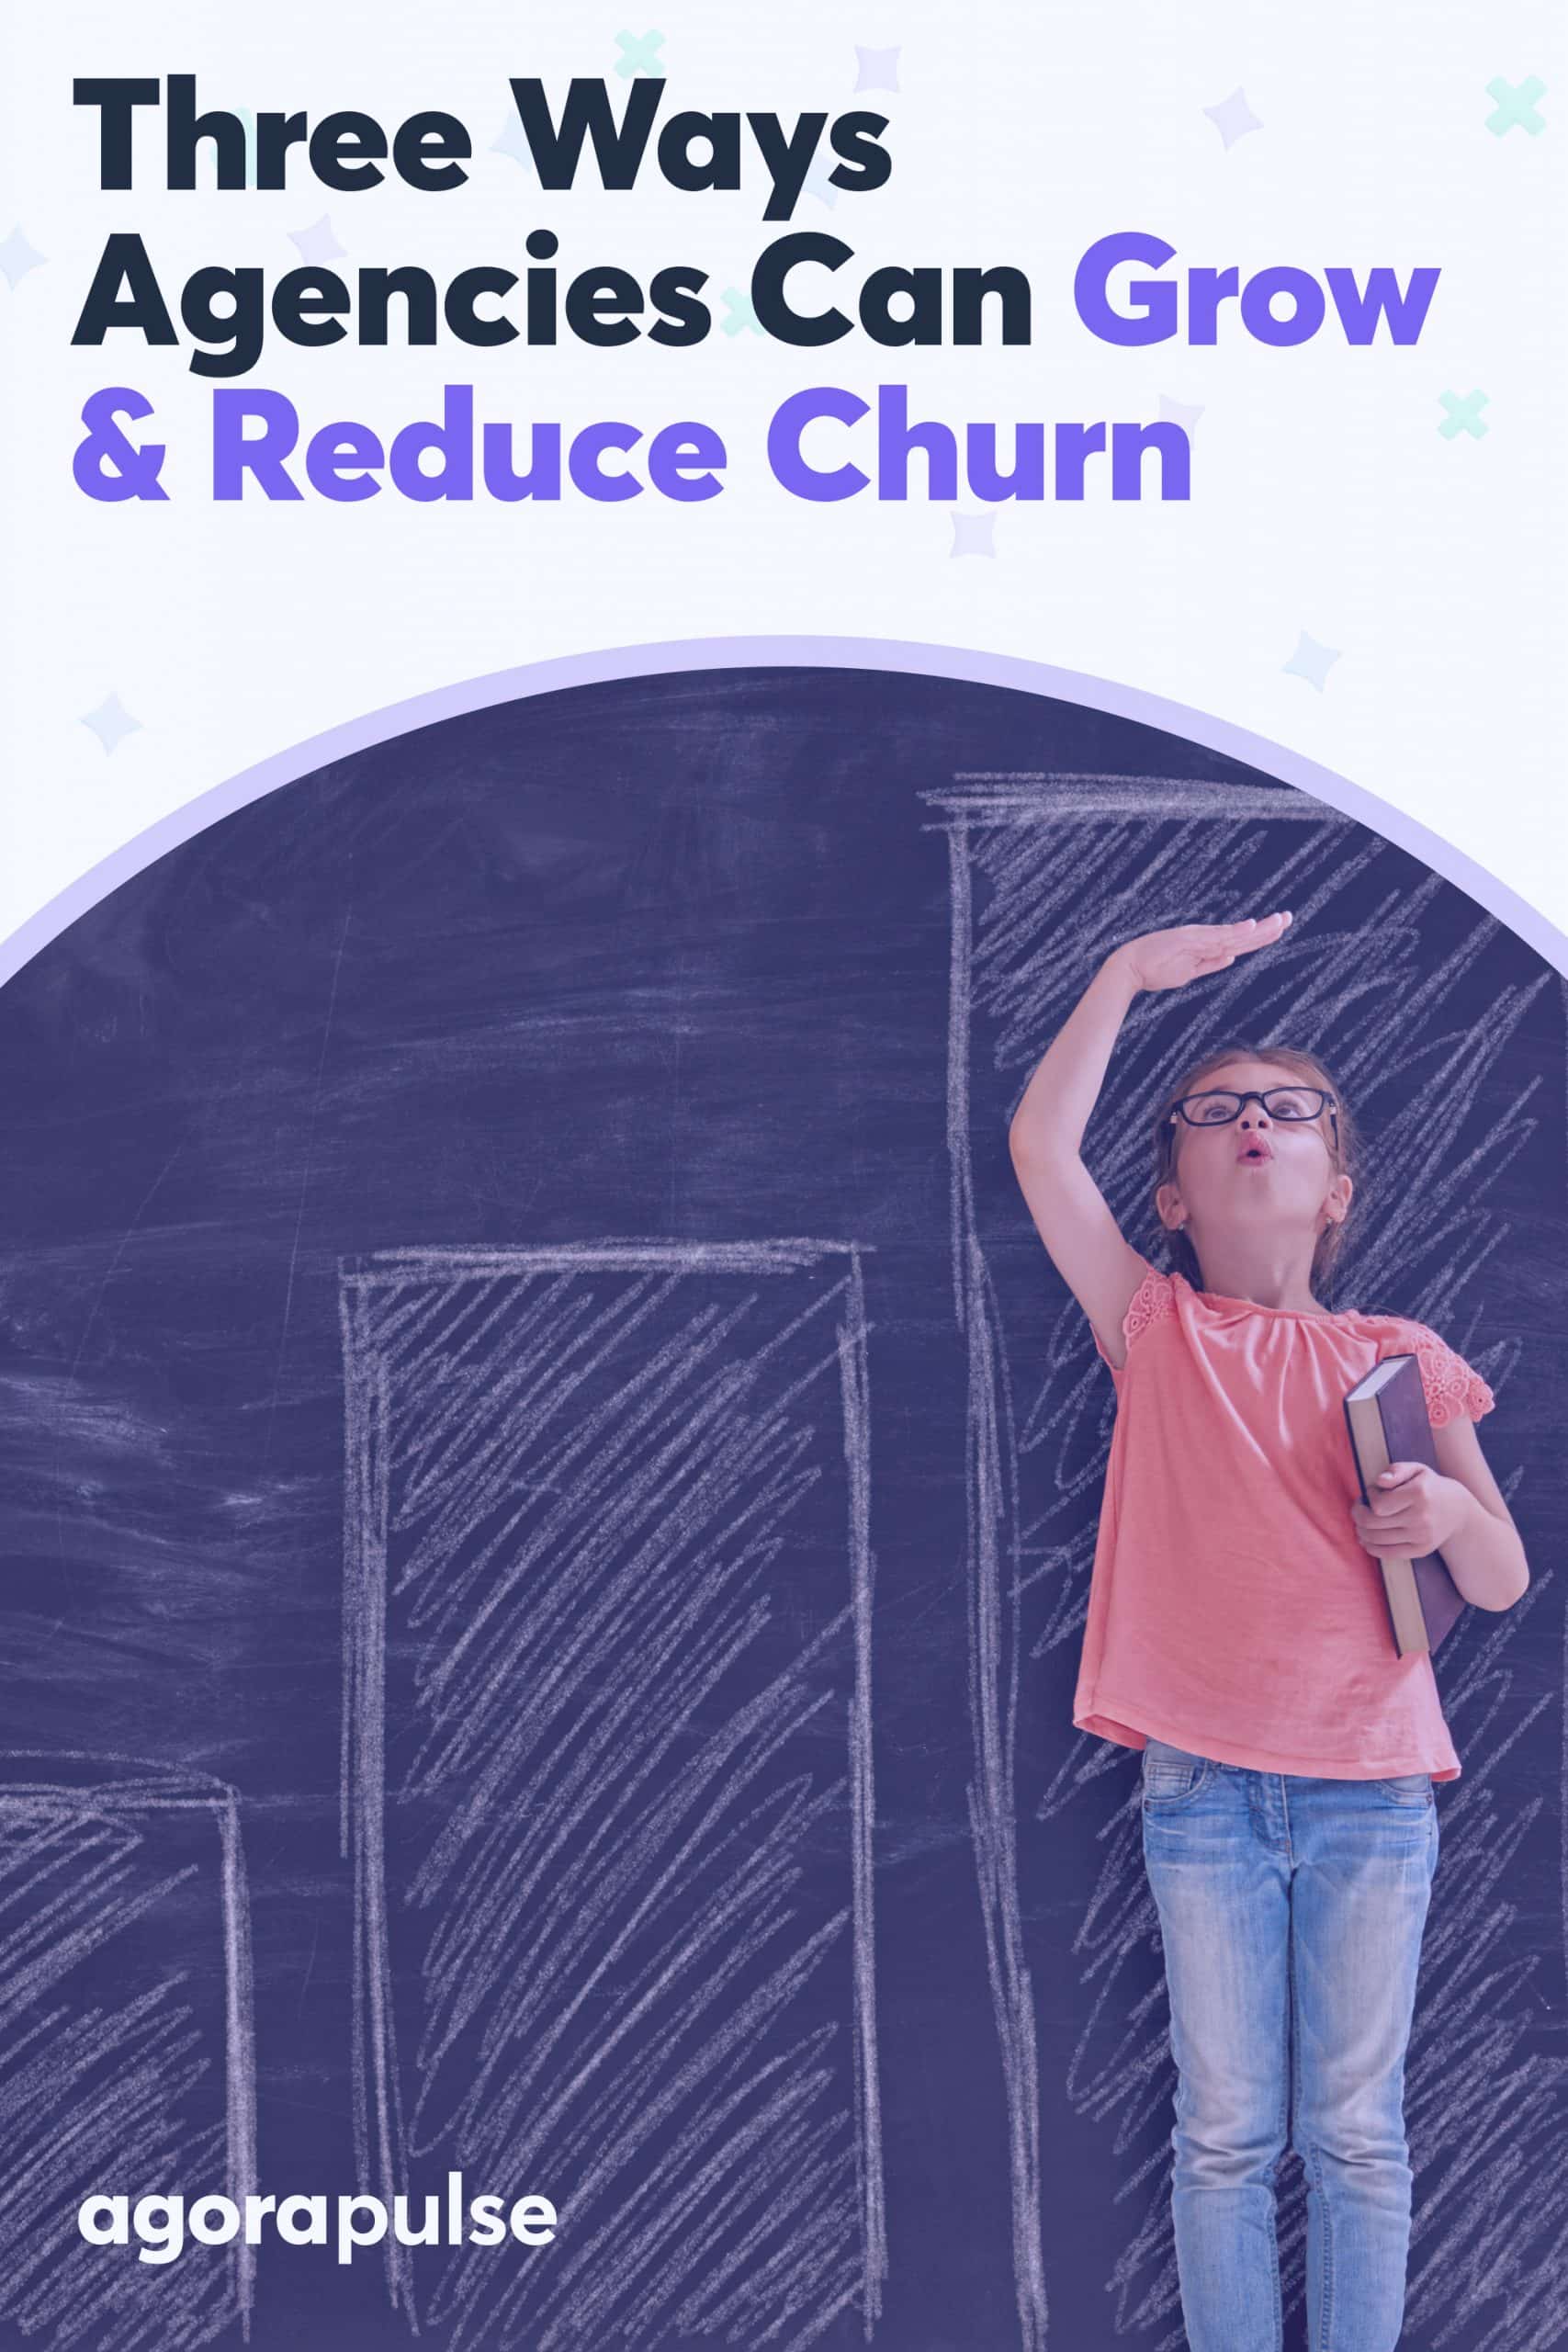 How You Can Achieve Agency Growth and Reduce Churn at the Same Time